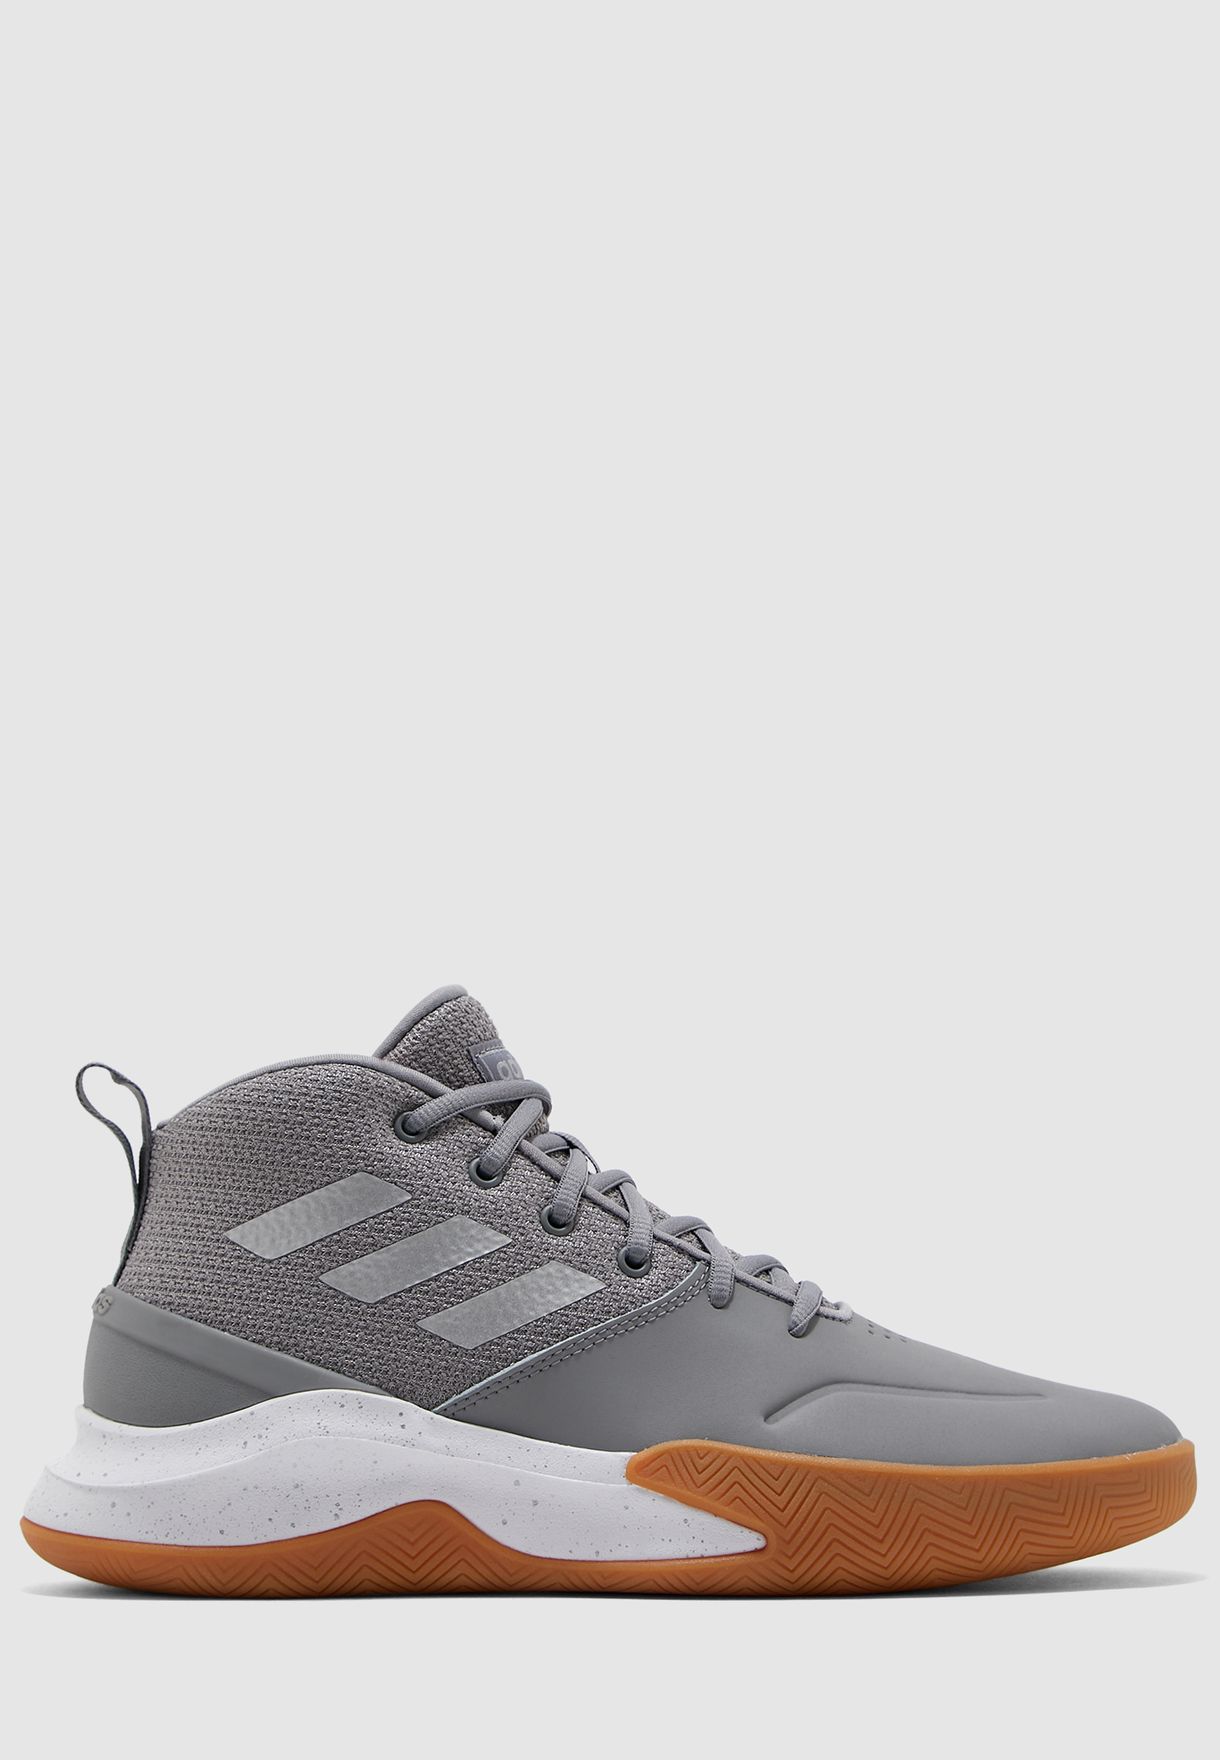 adidas own the game grey